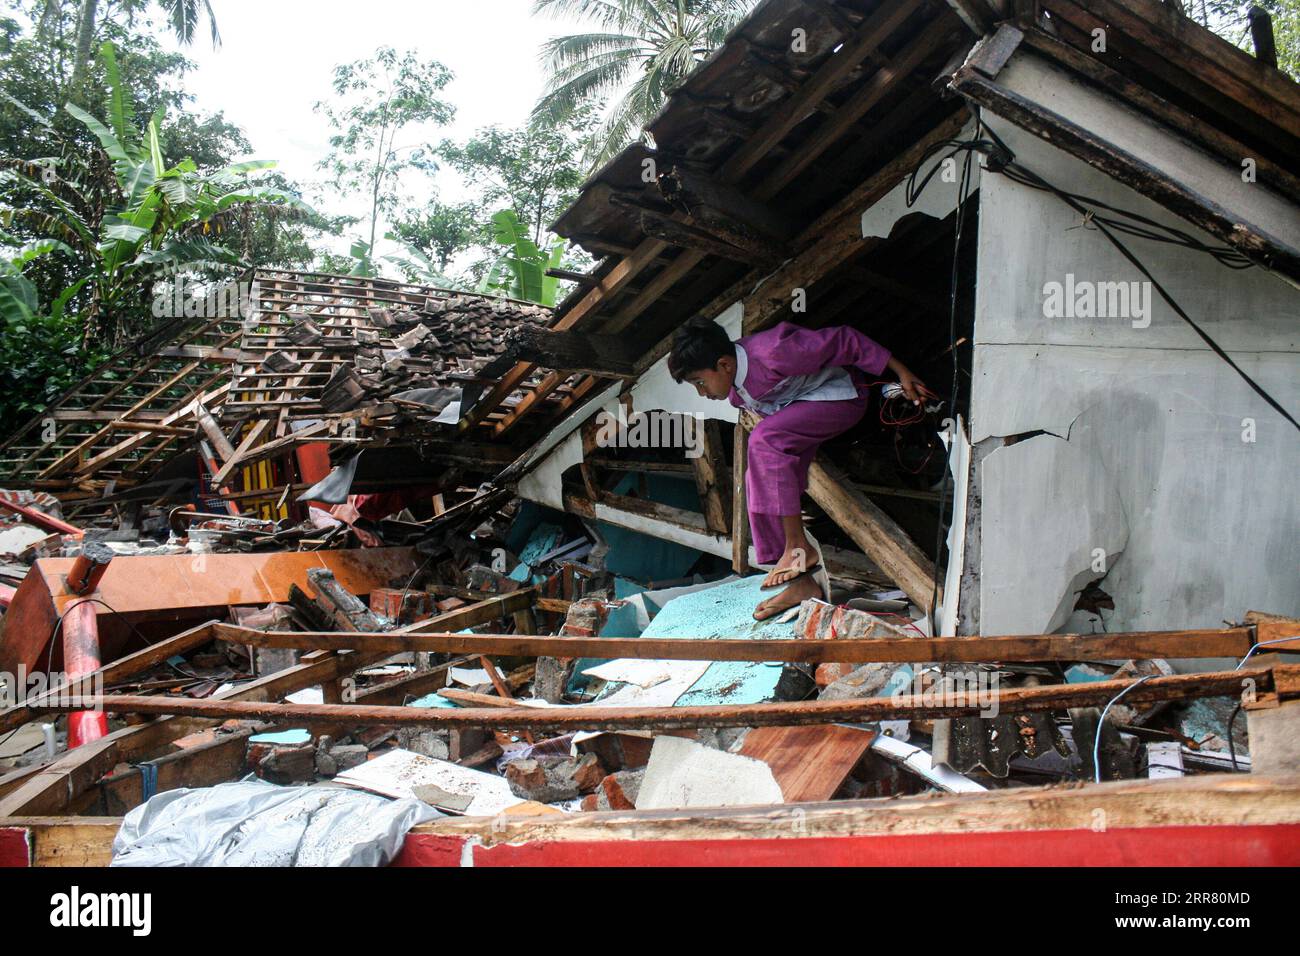 210411 -- EAST JAVA, April 11, 2021 -- A boy exits a damaged house after a 6.1 magnitude quake hit Kali Uling village in Lumajang, East Java, Indonesia, April 11, 2021. Six people were killed, another one was seriously injured, and scores of buildings were damaged after a 6.1-magnitude quake rocked Indonesia s western province of East Java on Saturday, officials said. The earthquake struck at 2 p.m. Jakarta time 0700 GMT with the epicenter 96 km south of Kepanjen town of Malang district with a depth of 80 km, Andry Sembiring, an official at the Meteorology, Climatology and Geophysics Agency, s Stock Photo